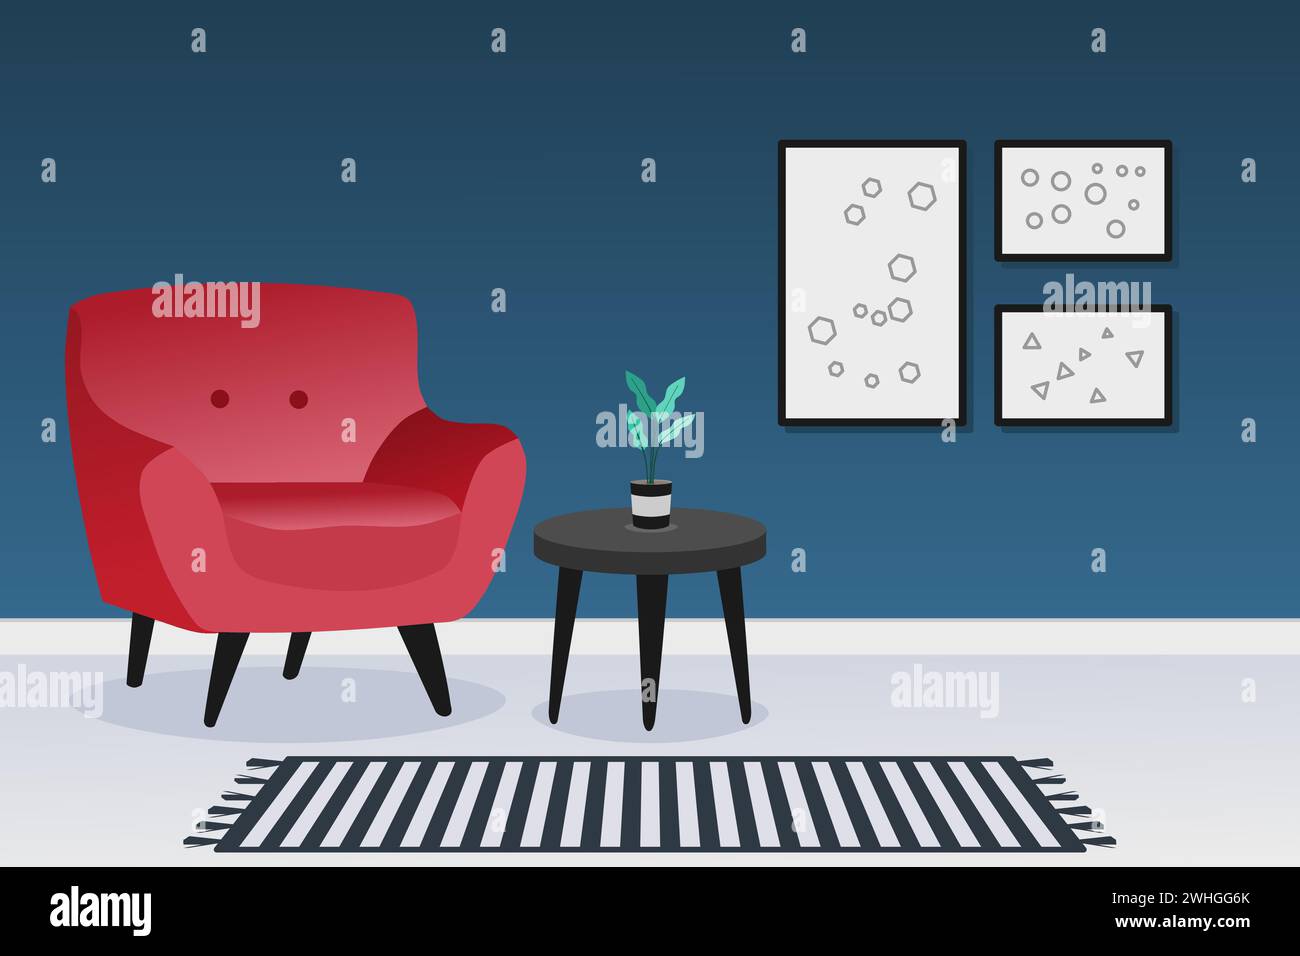 Interior design of a living room with red sofa and dark blue wall. Home interior. Vector illustration. Stock Vector